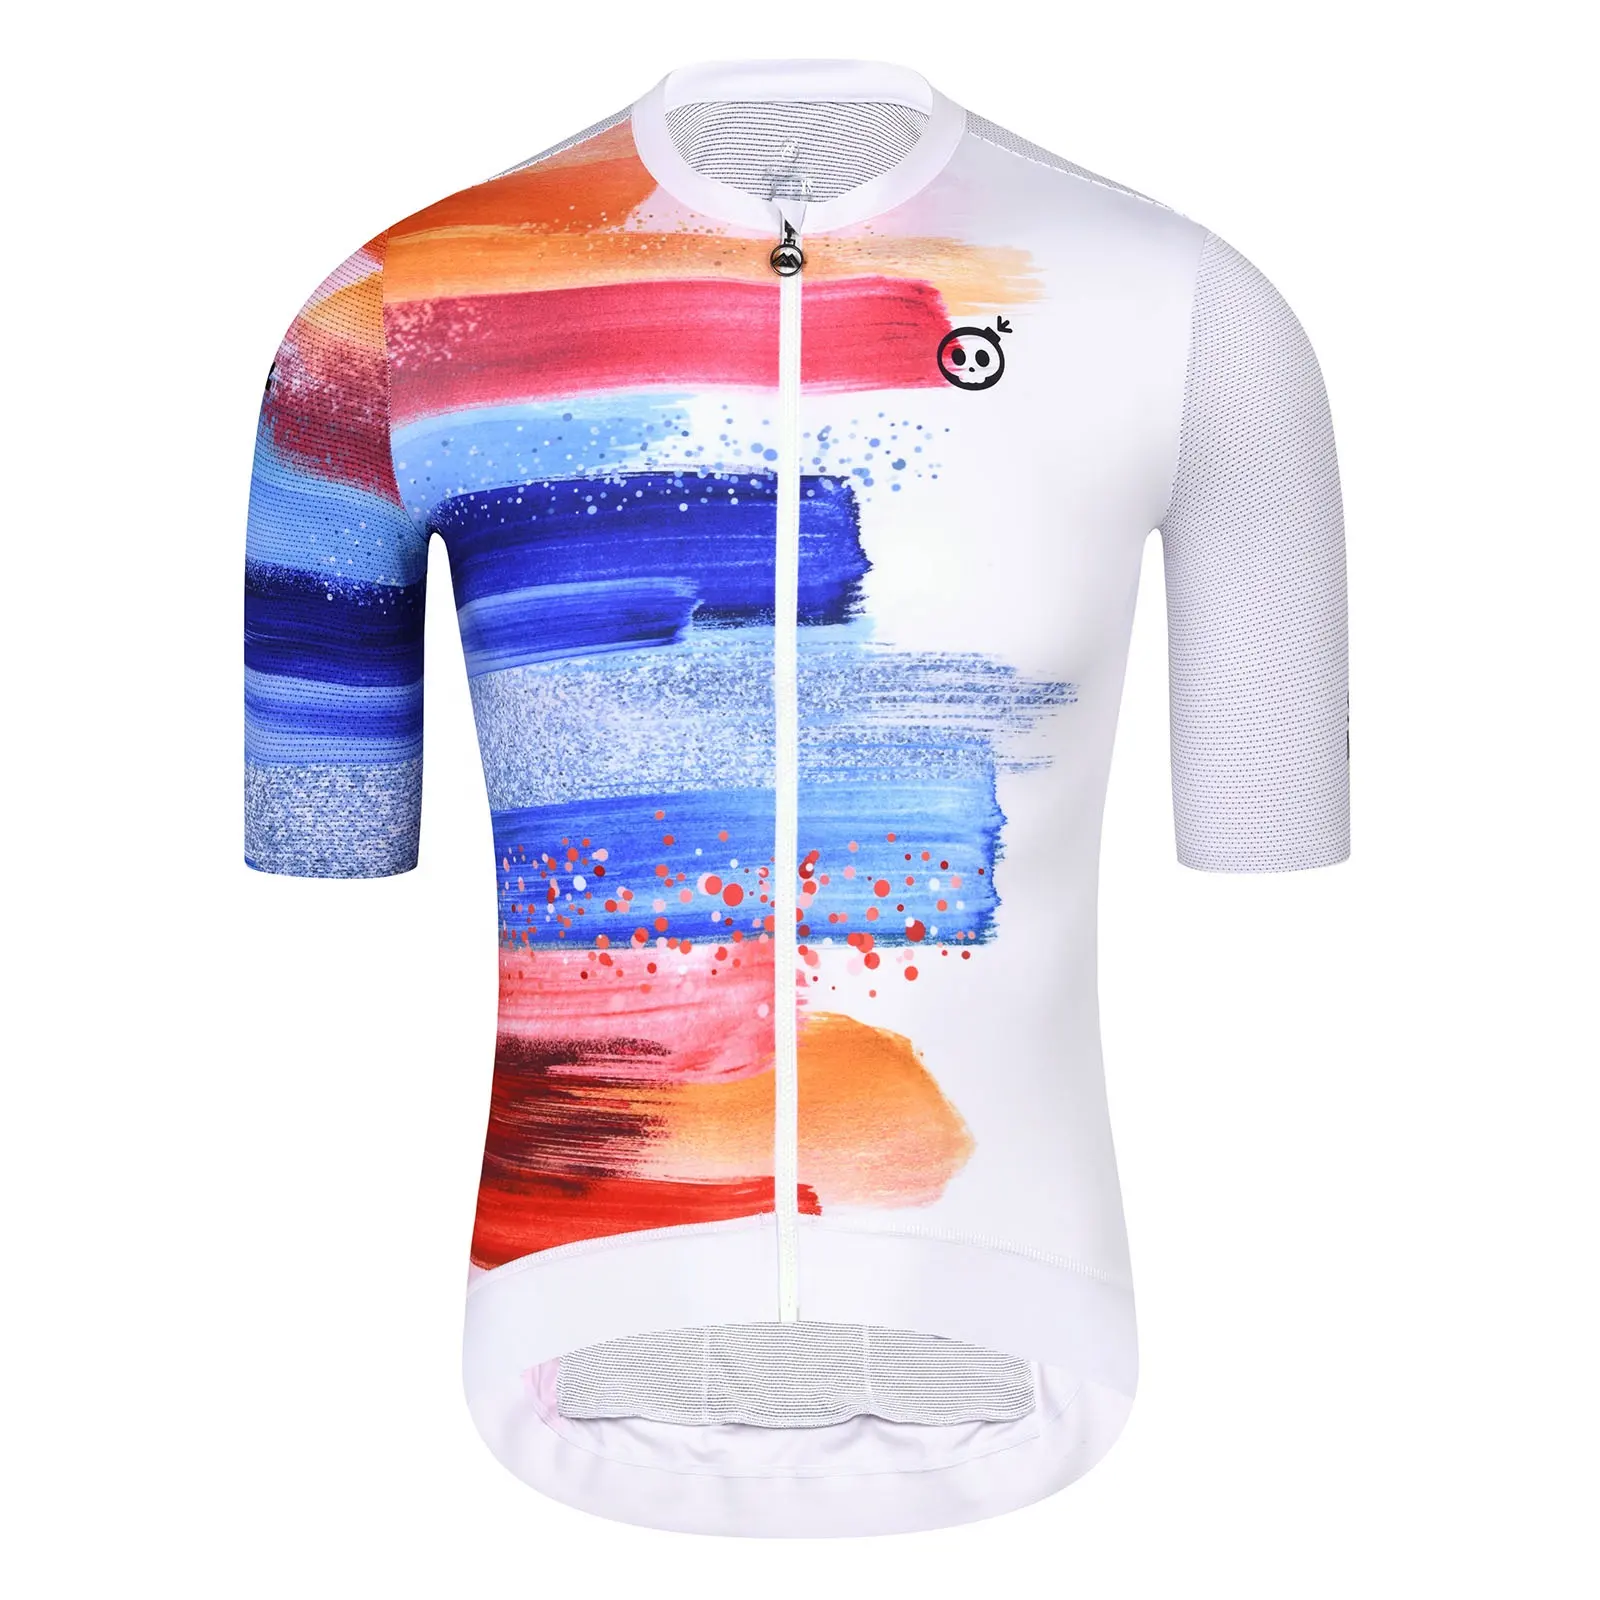 Monton Private Label Hot Weather Cooling Road Bicycle Sublimated Cycling Jersey Men